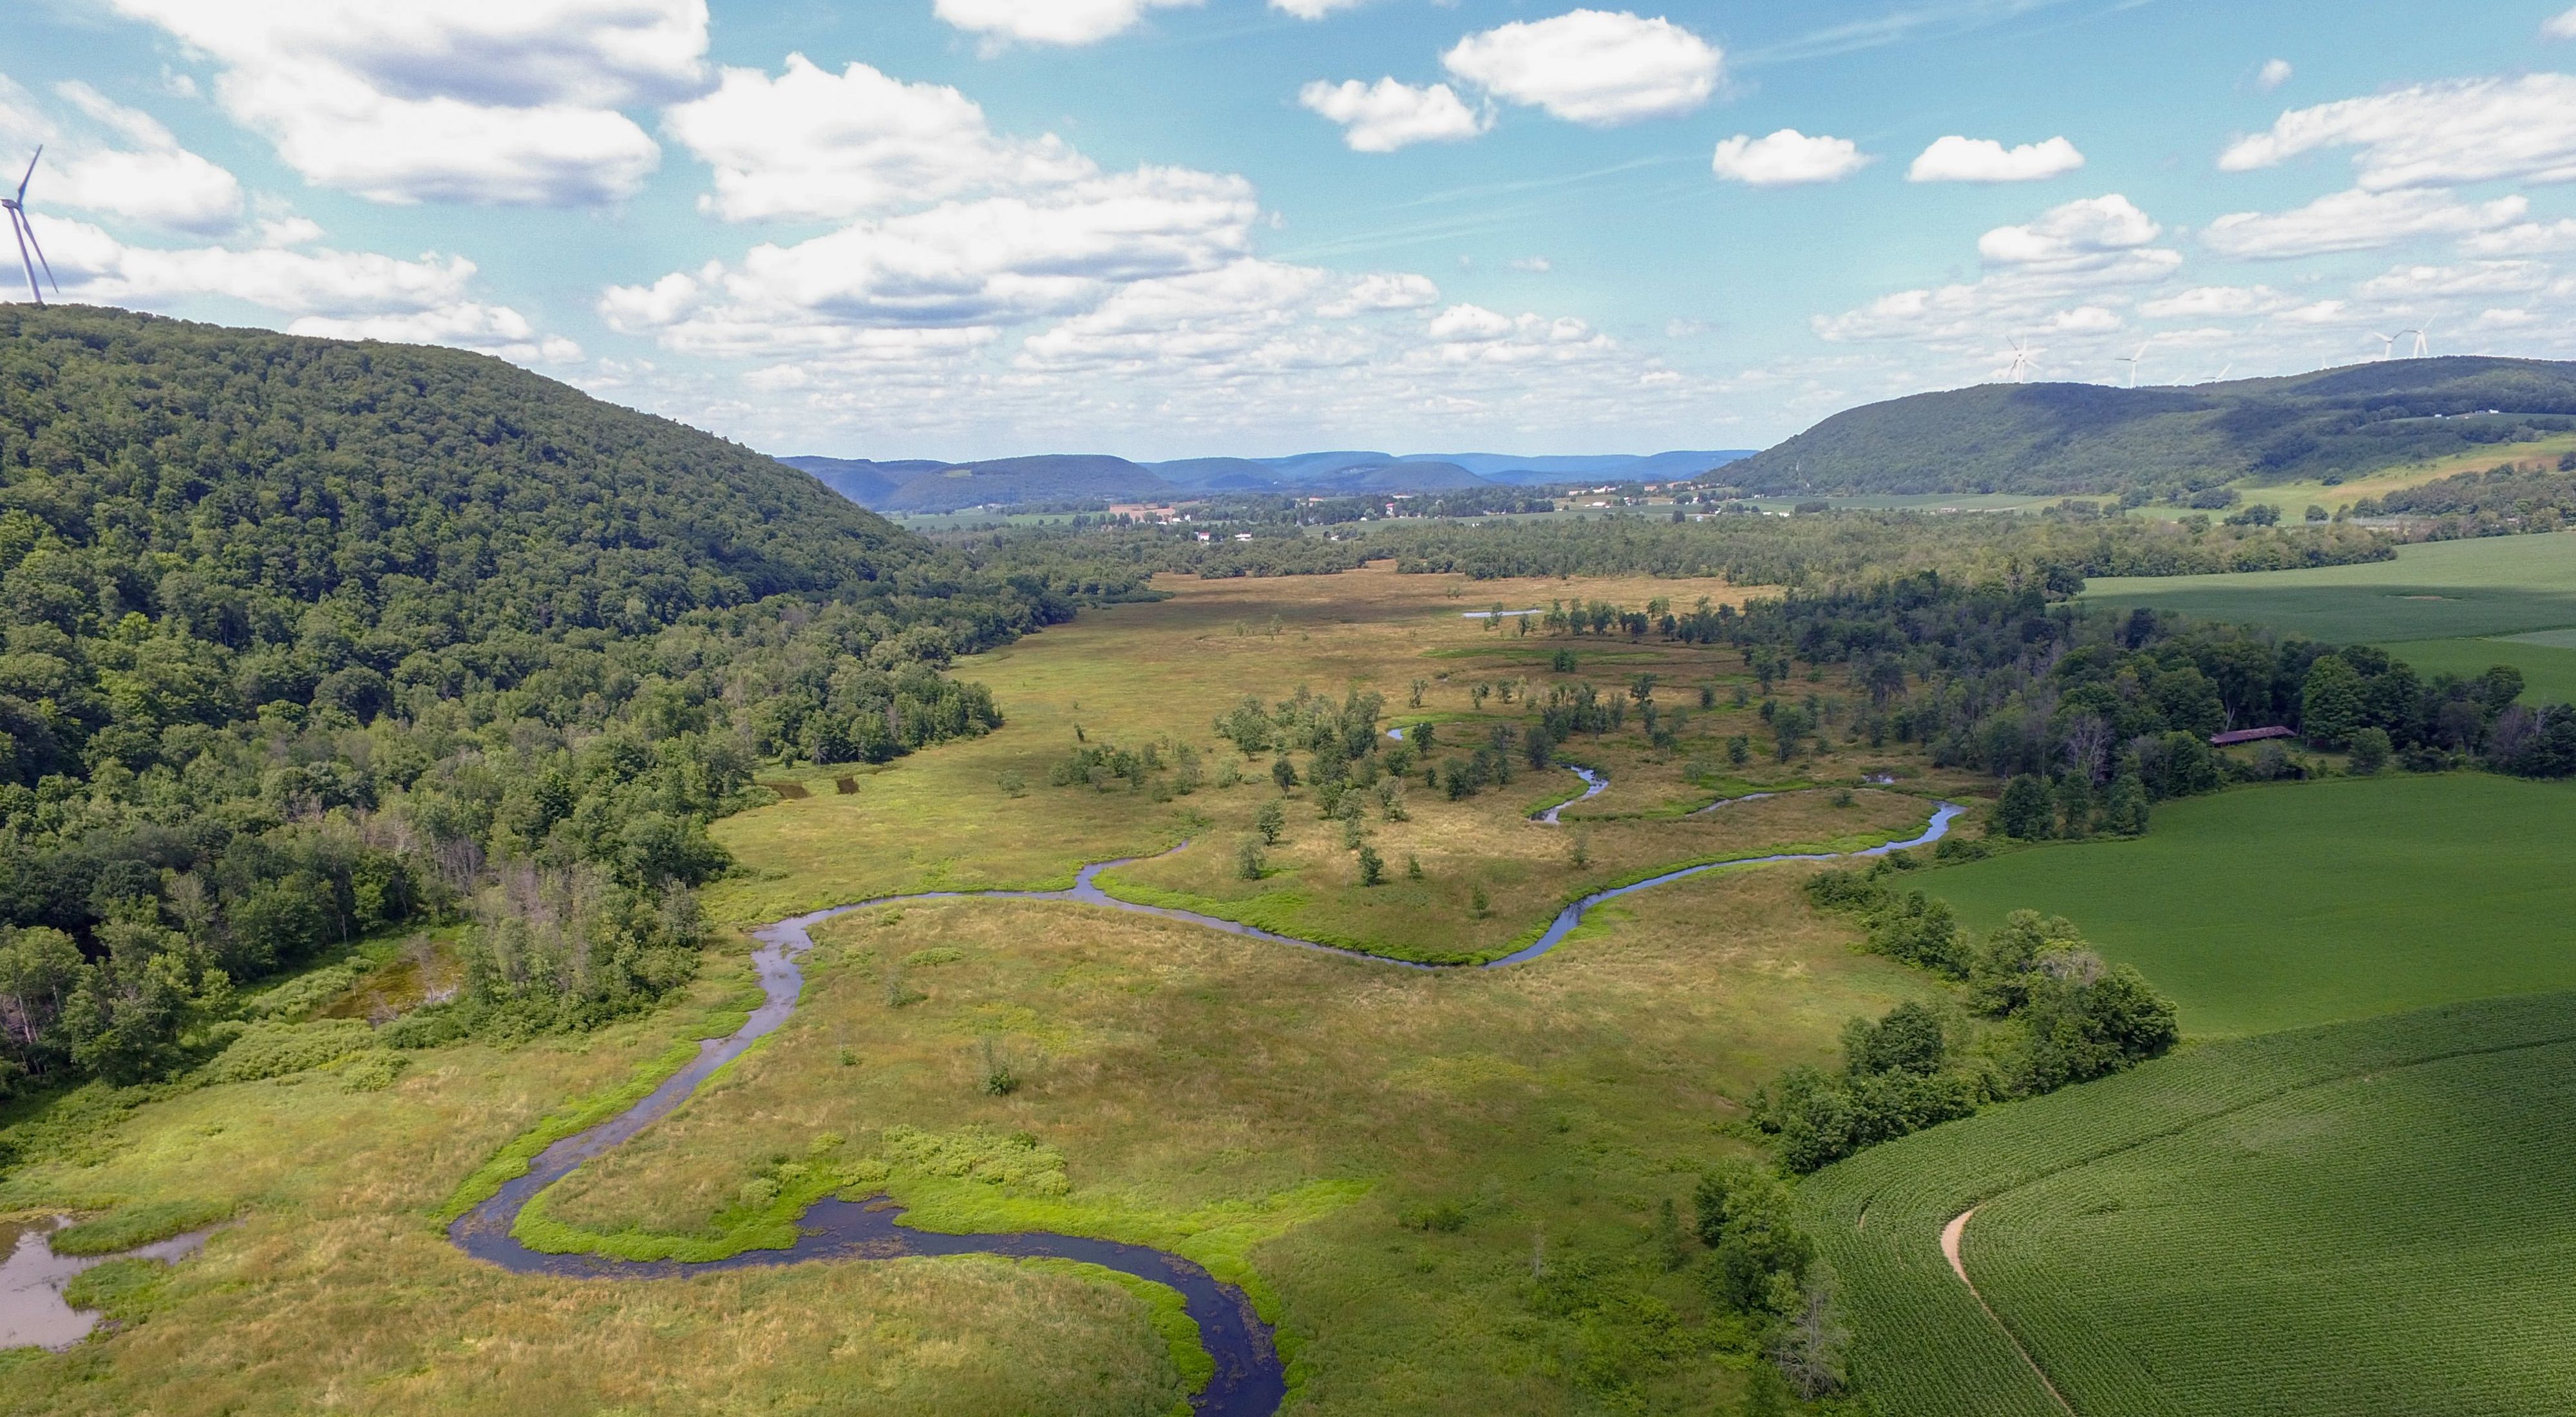 Aerial view of the Cohocton River winding through a green wetland with a blue sky and clouds in background.